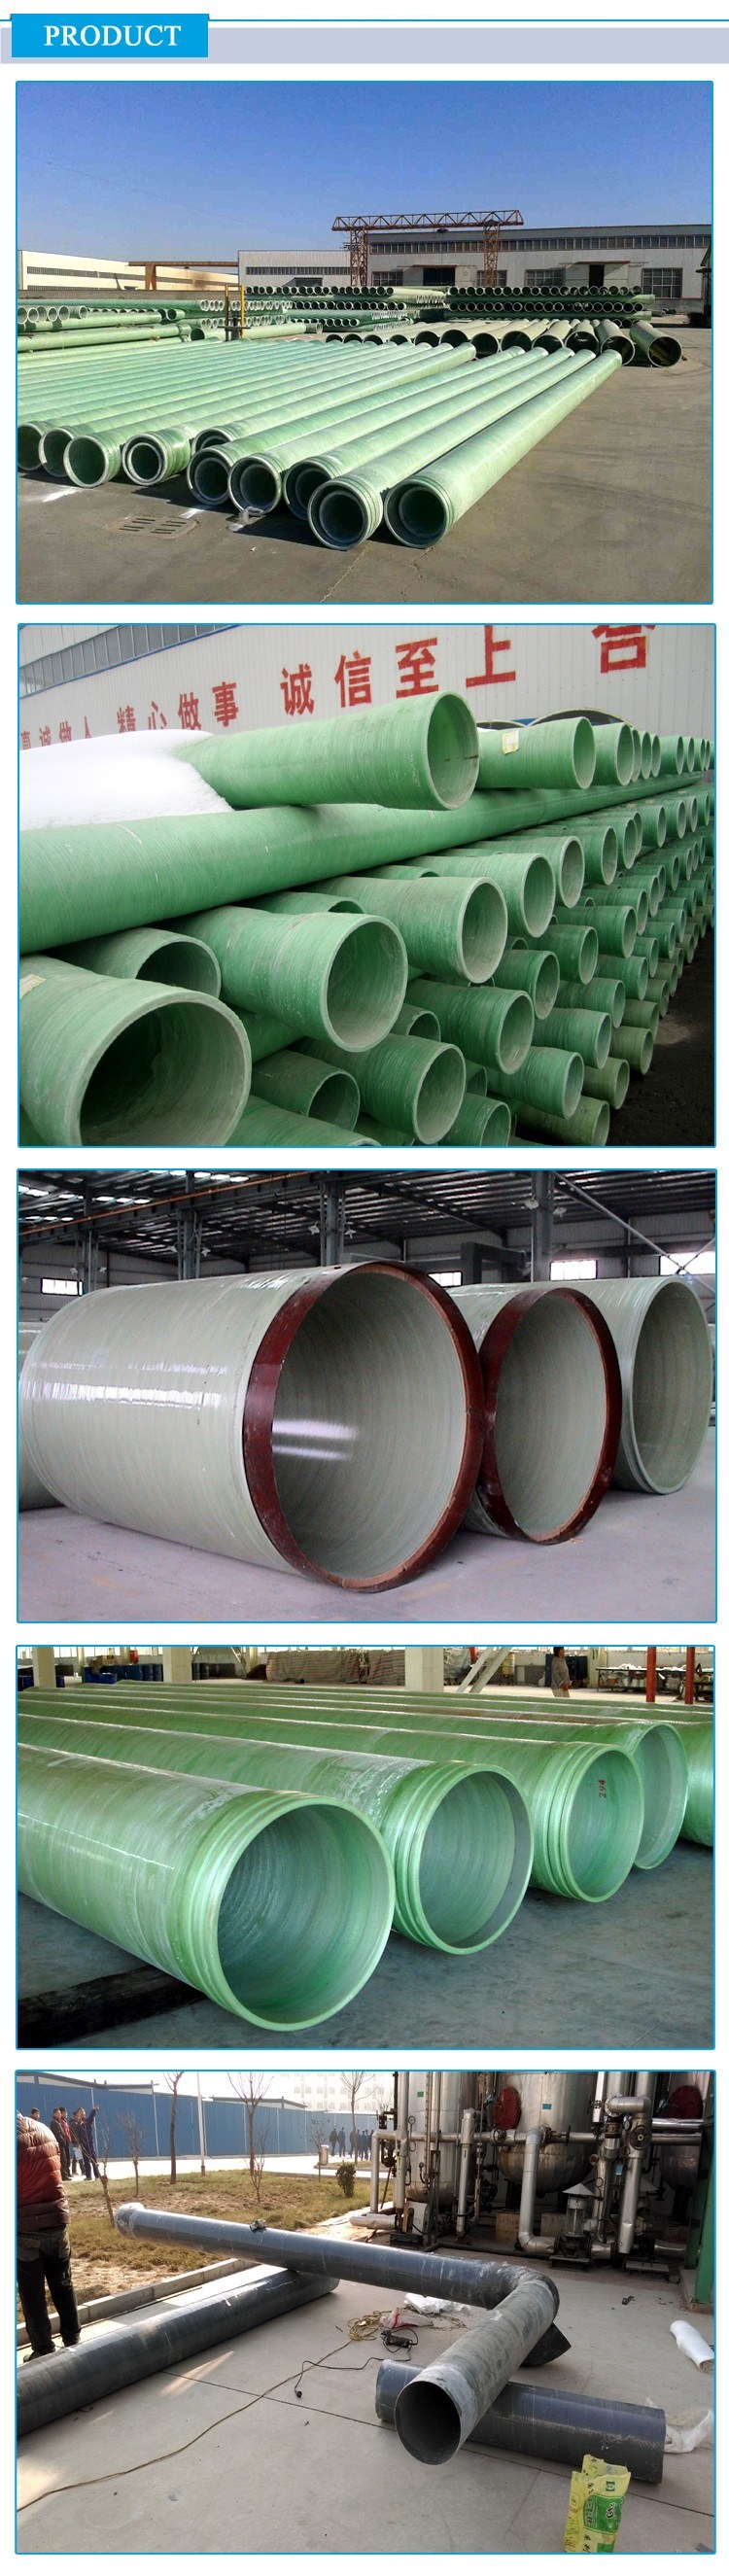 Price Competitive with SGS ISO9001 Certificated FRP Fiberglass Pipes